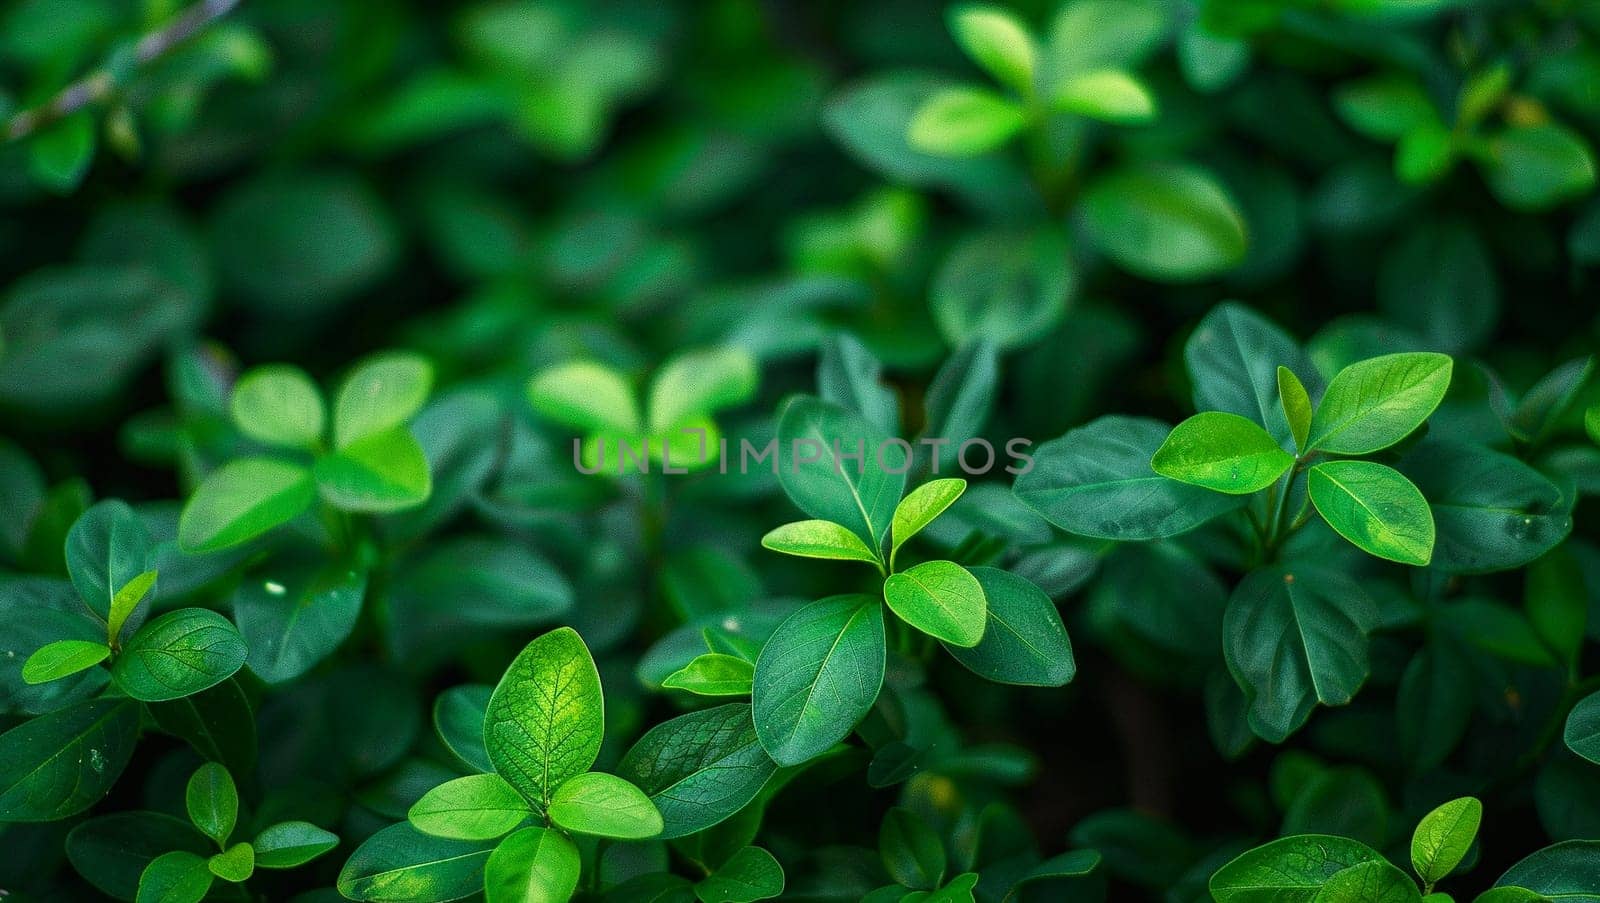 Leaves abstract green texture, nature background, tropical leaf. Beautiful wallpaper. High quality photo